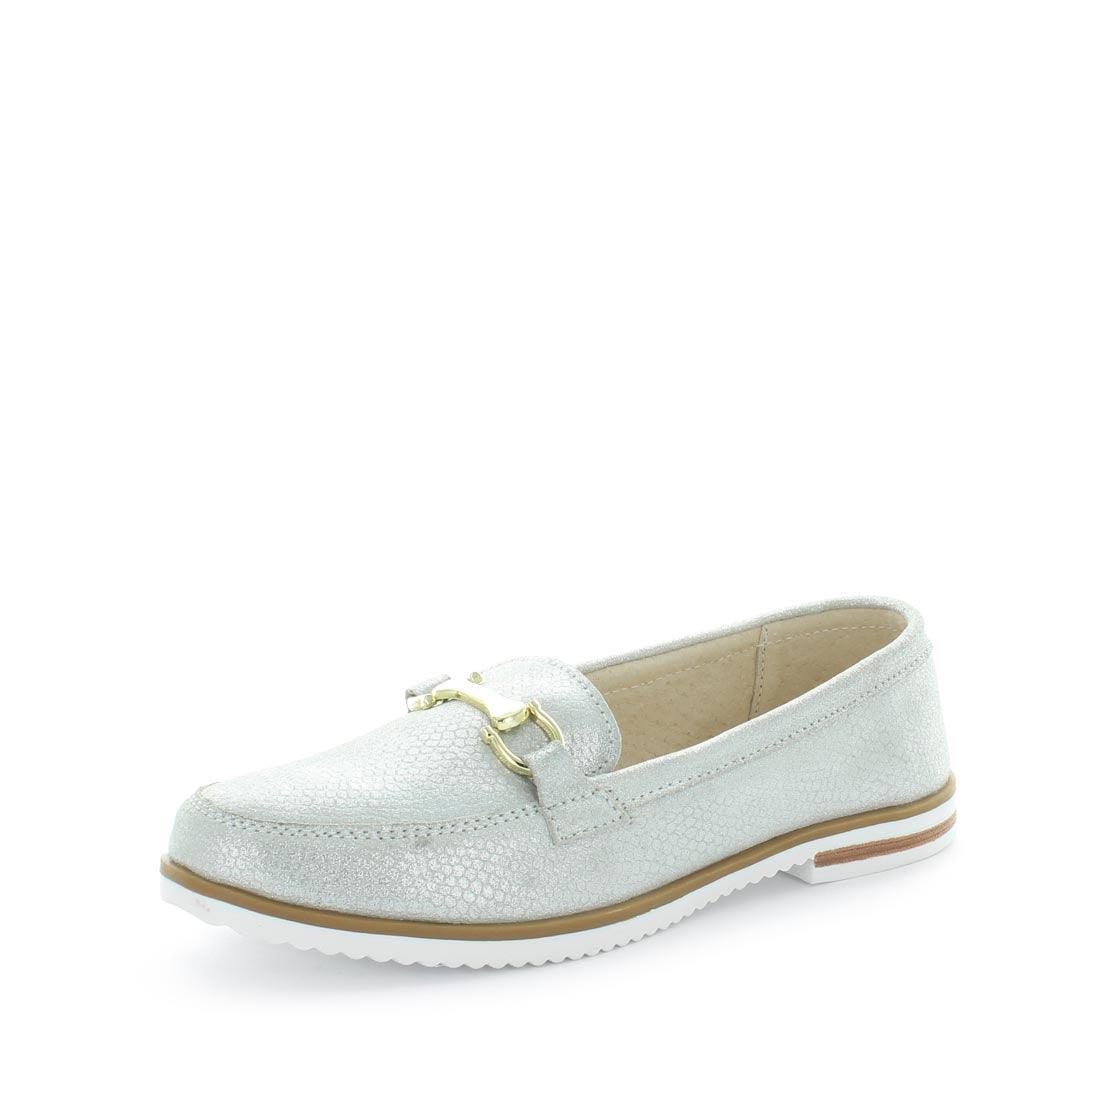 CRESSY A by JUST BEE - iShoes - NEW ARRIVALS, What's New, What's New: Most Popular, What's New: Women's New Arrivals, Women's Shoes, Women's Shoes: Flats, Women's Shoes: Lifestyle Shoes - FOOTWEAR-FOOTWEAR